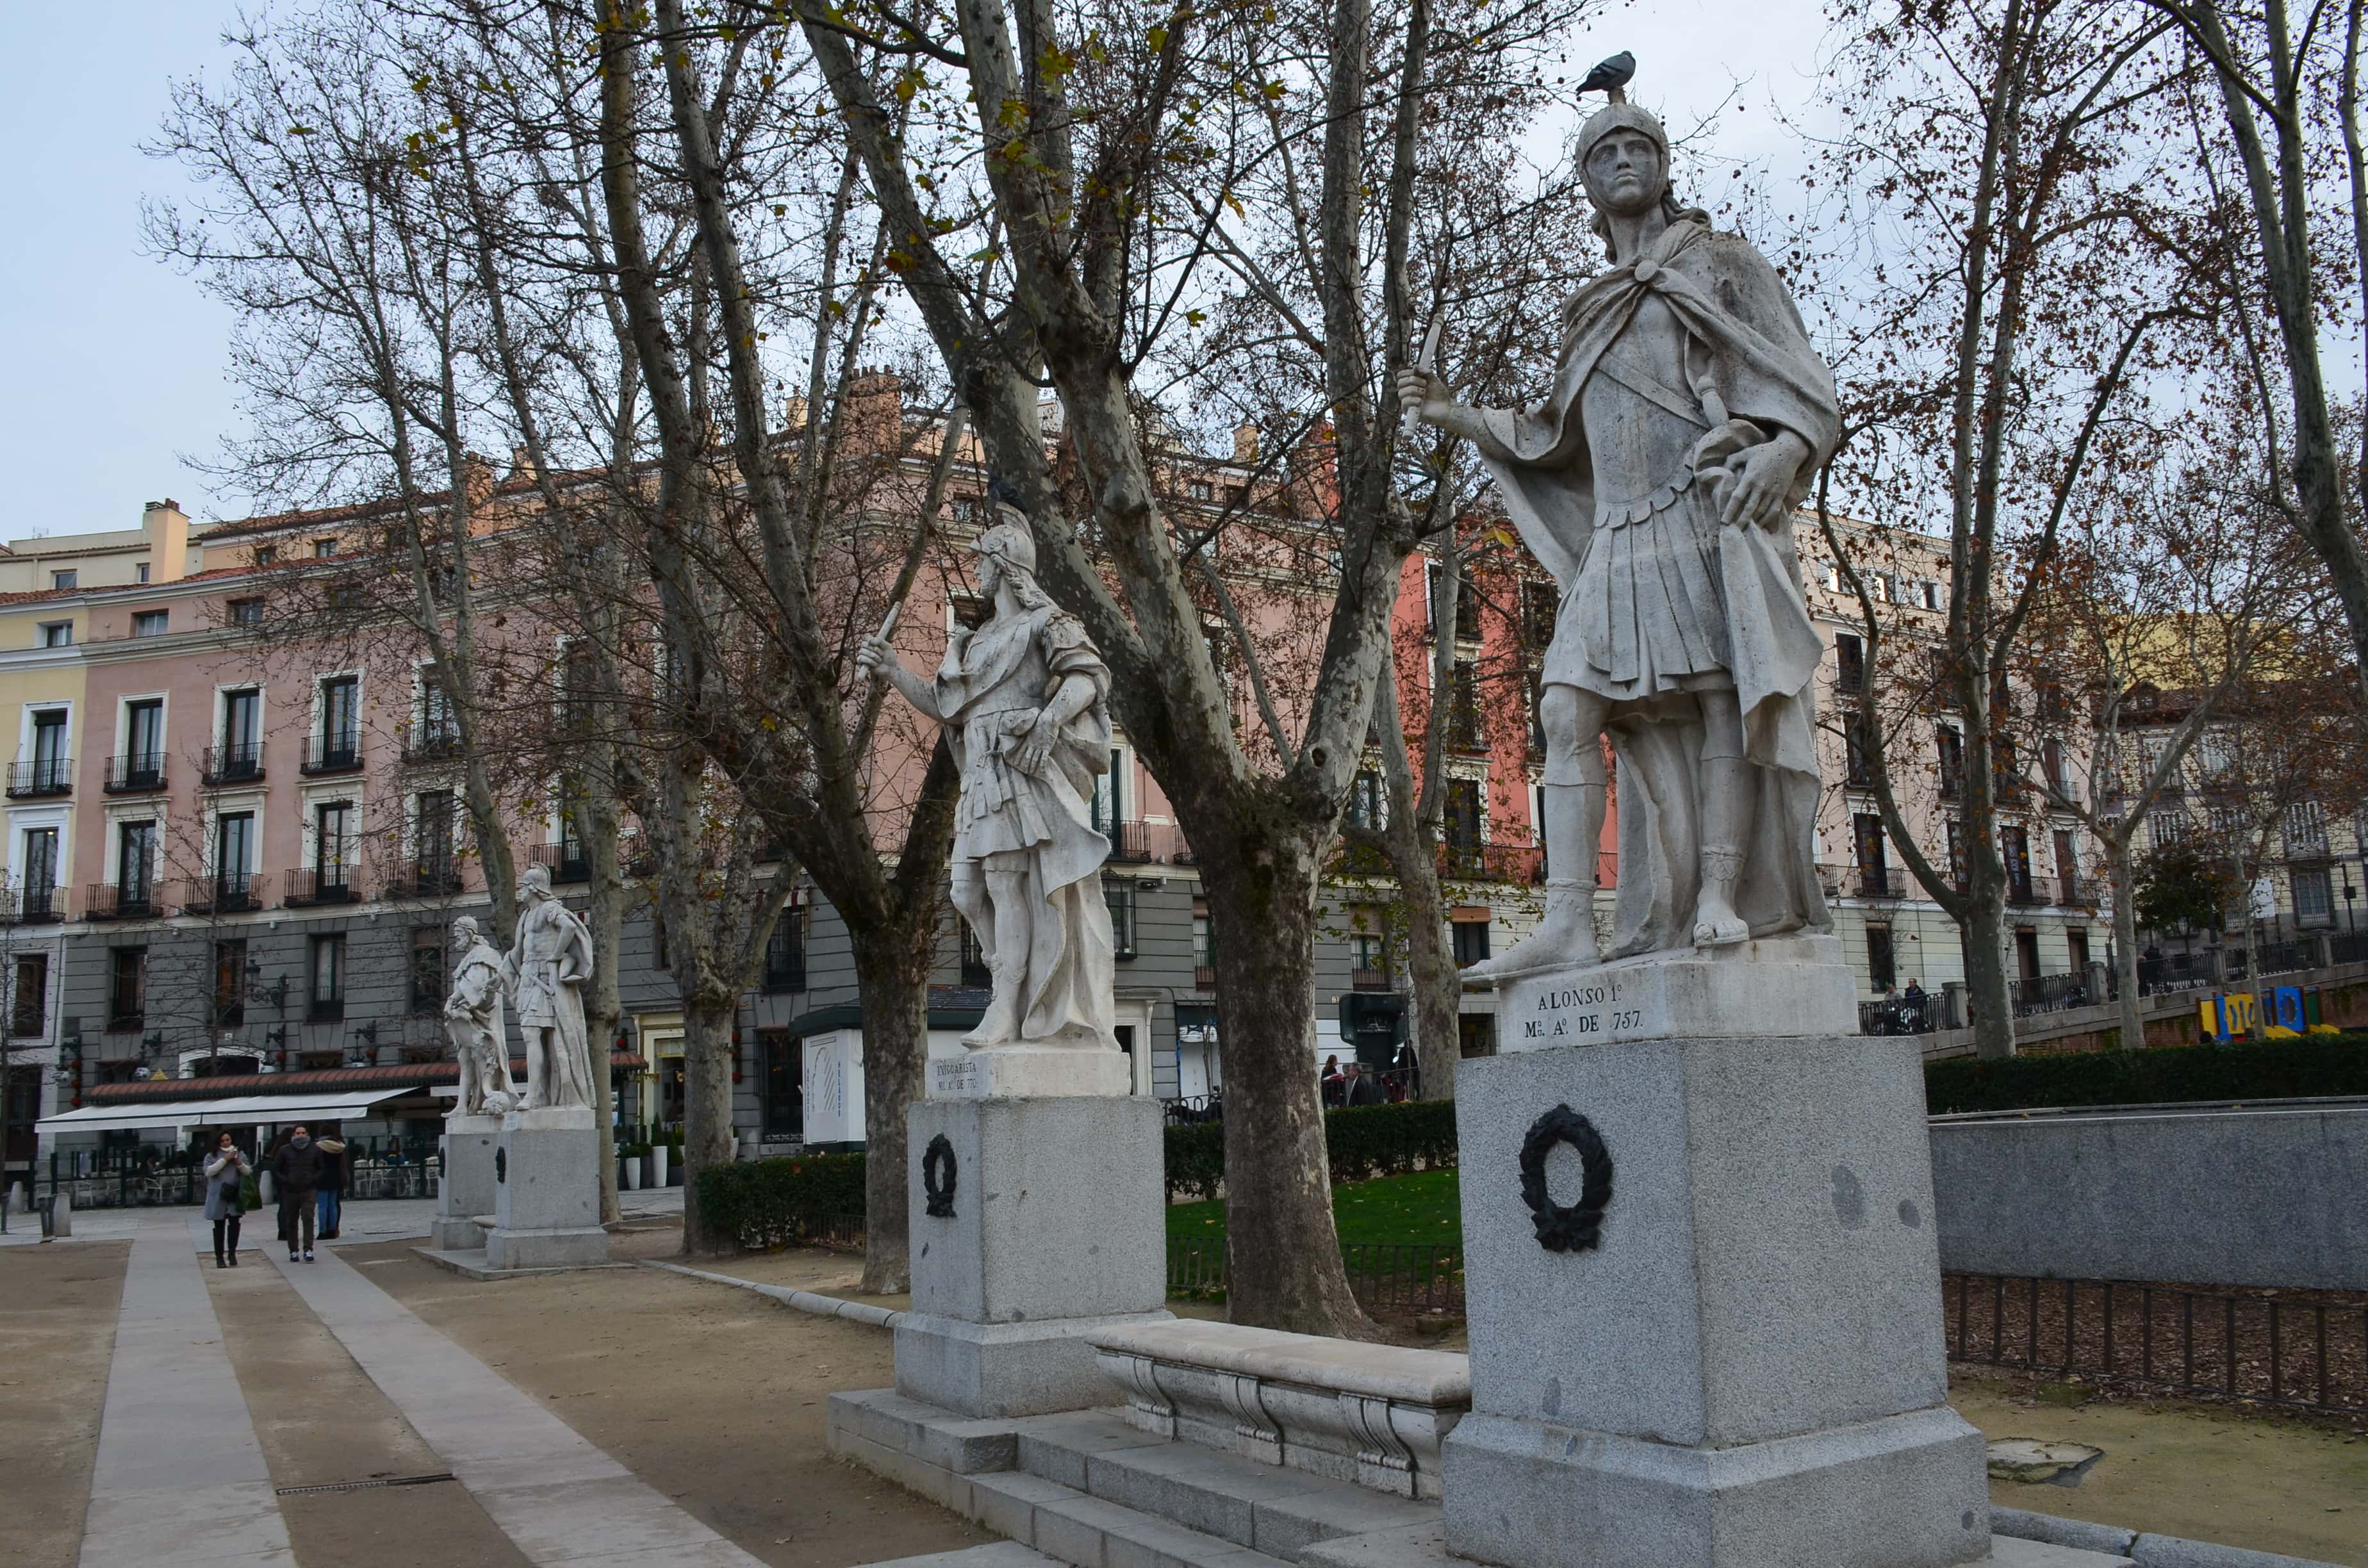 Statues of Gothic kings at Plaza de Oriente in Madrid, Spain